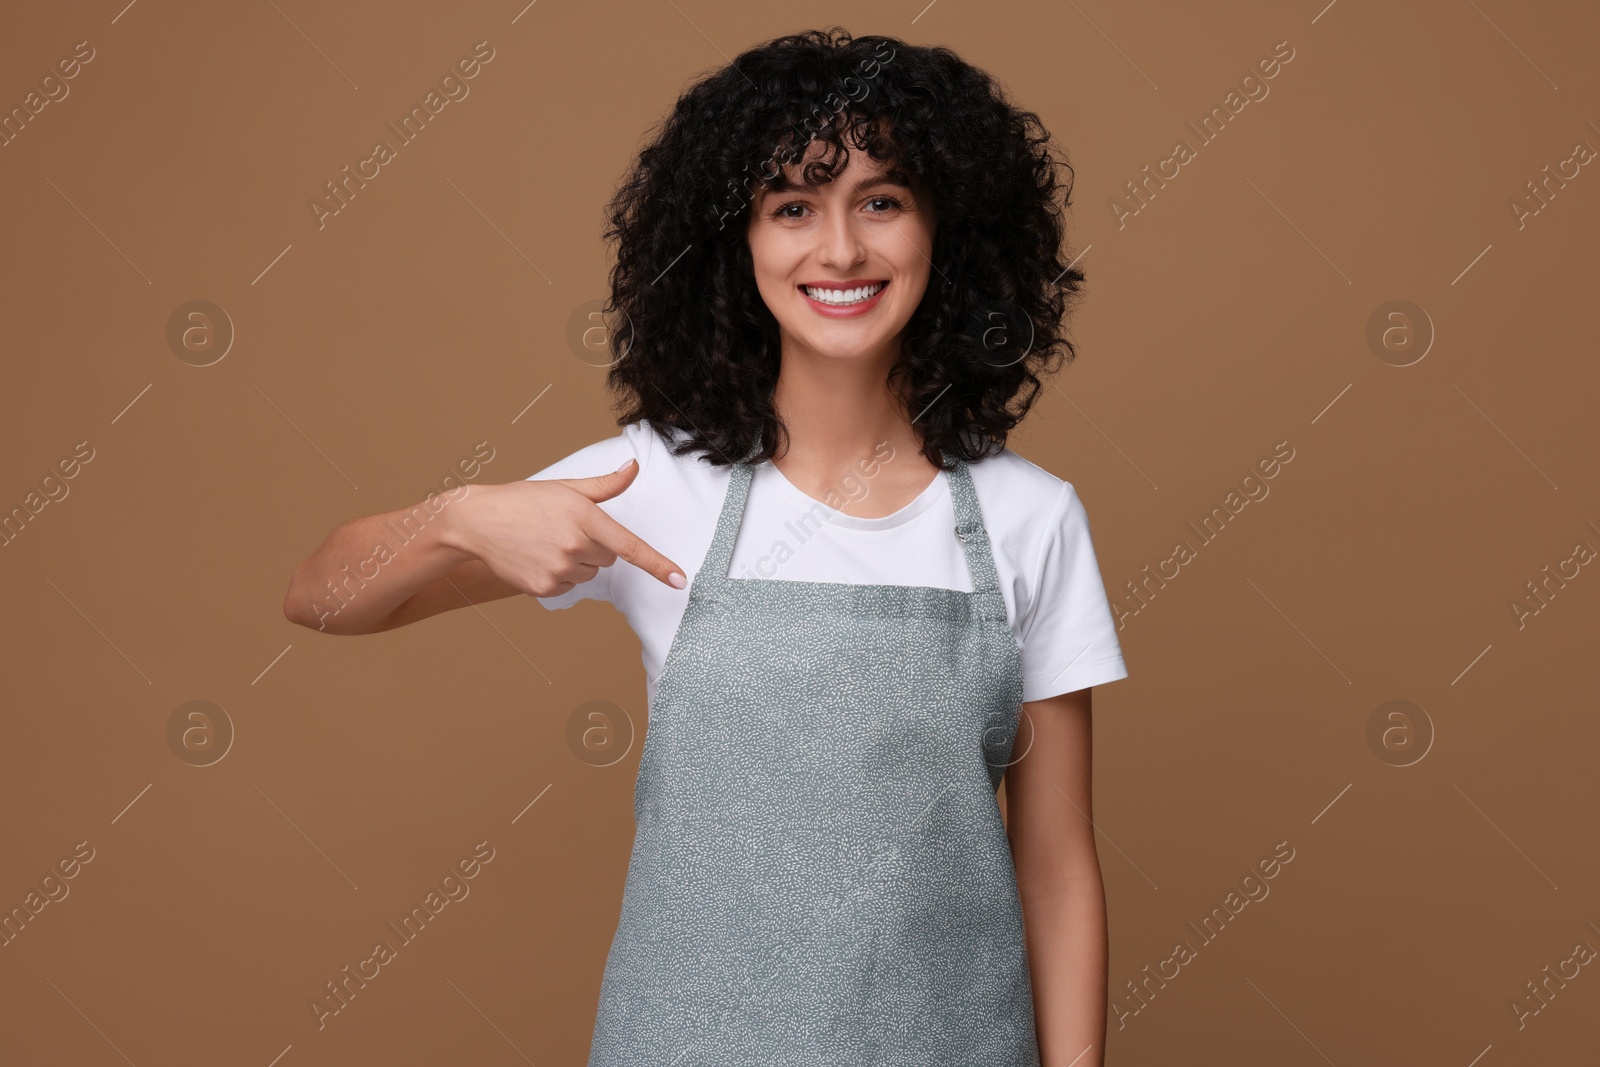 Photo of Happy woman pointing at kitchen apron on brown background. Mockup for design